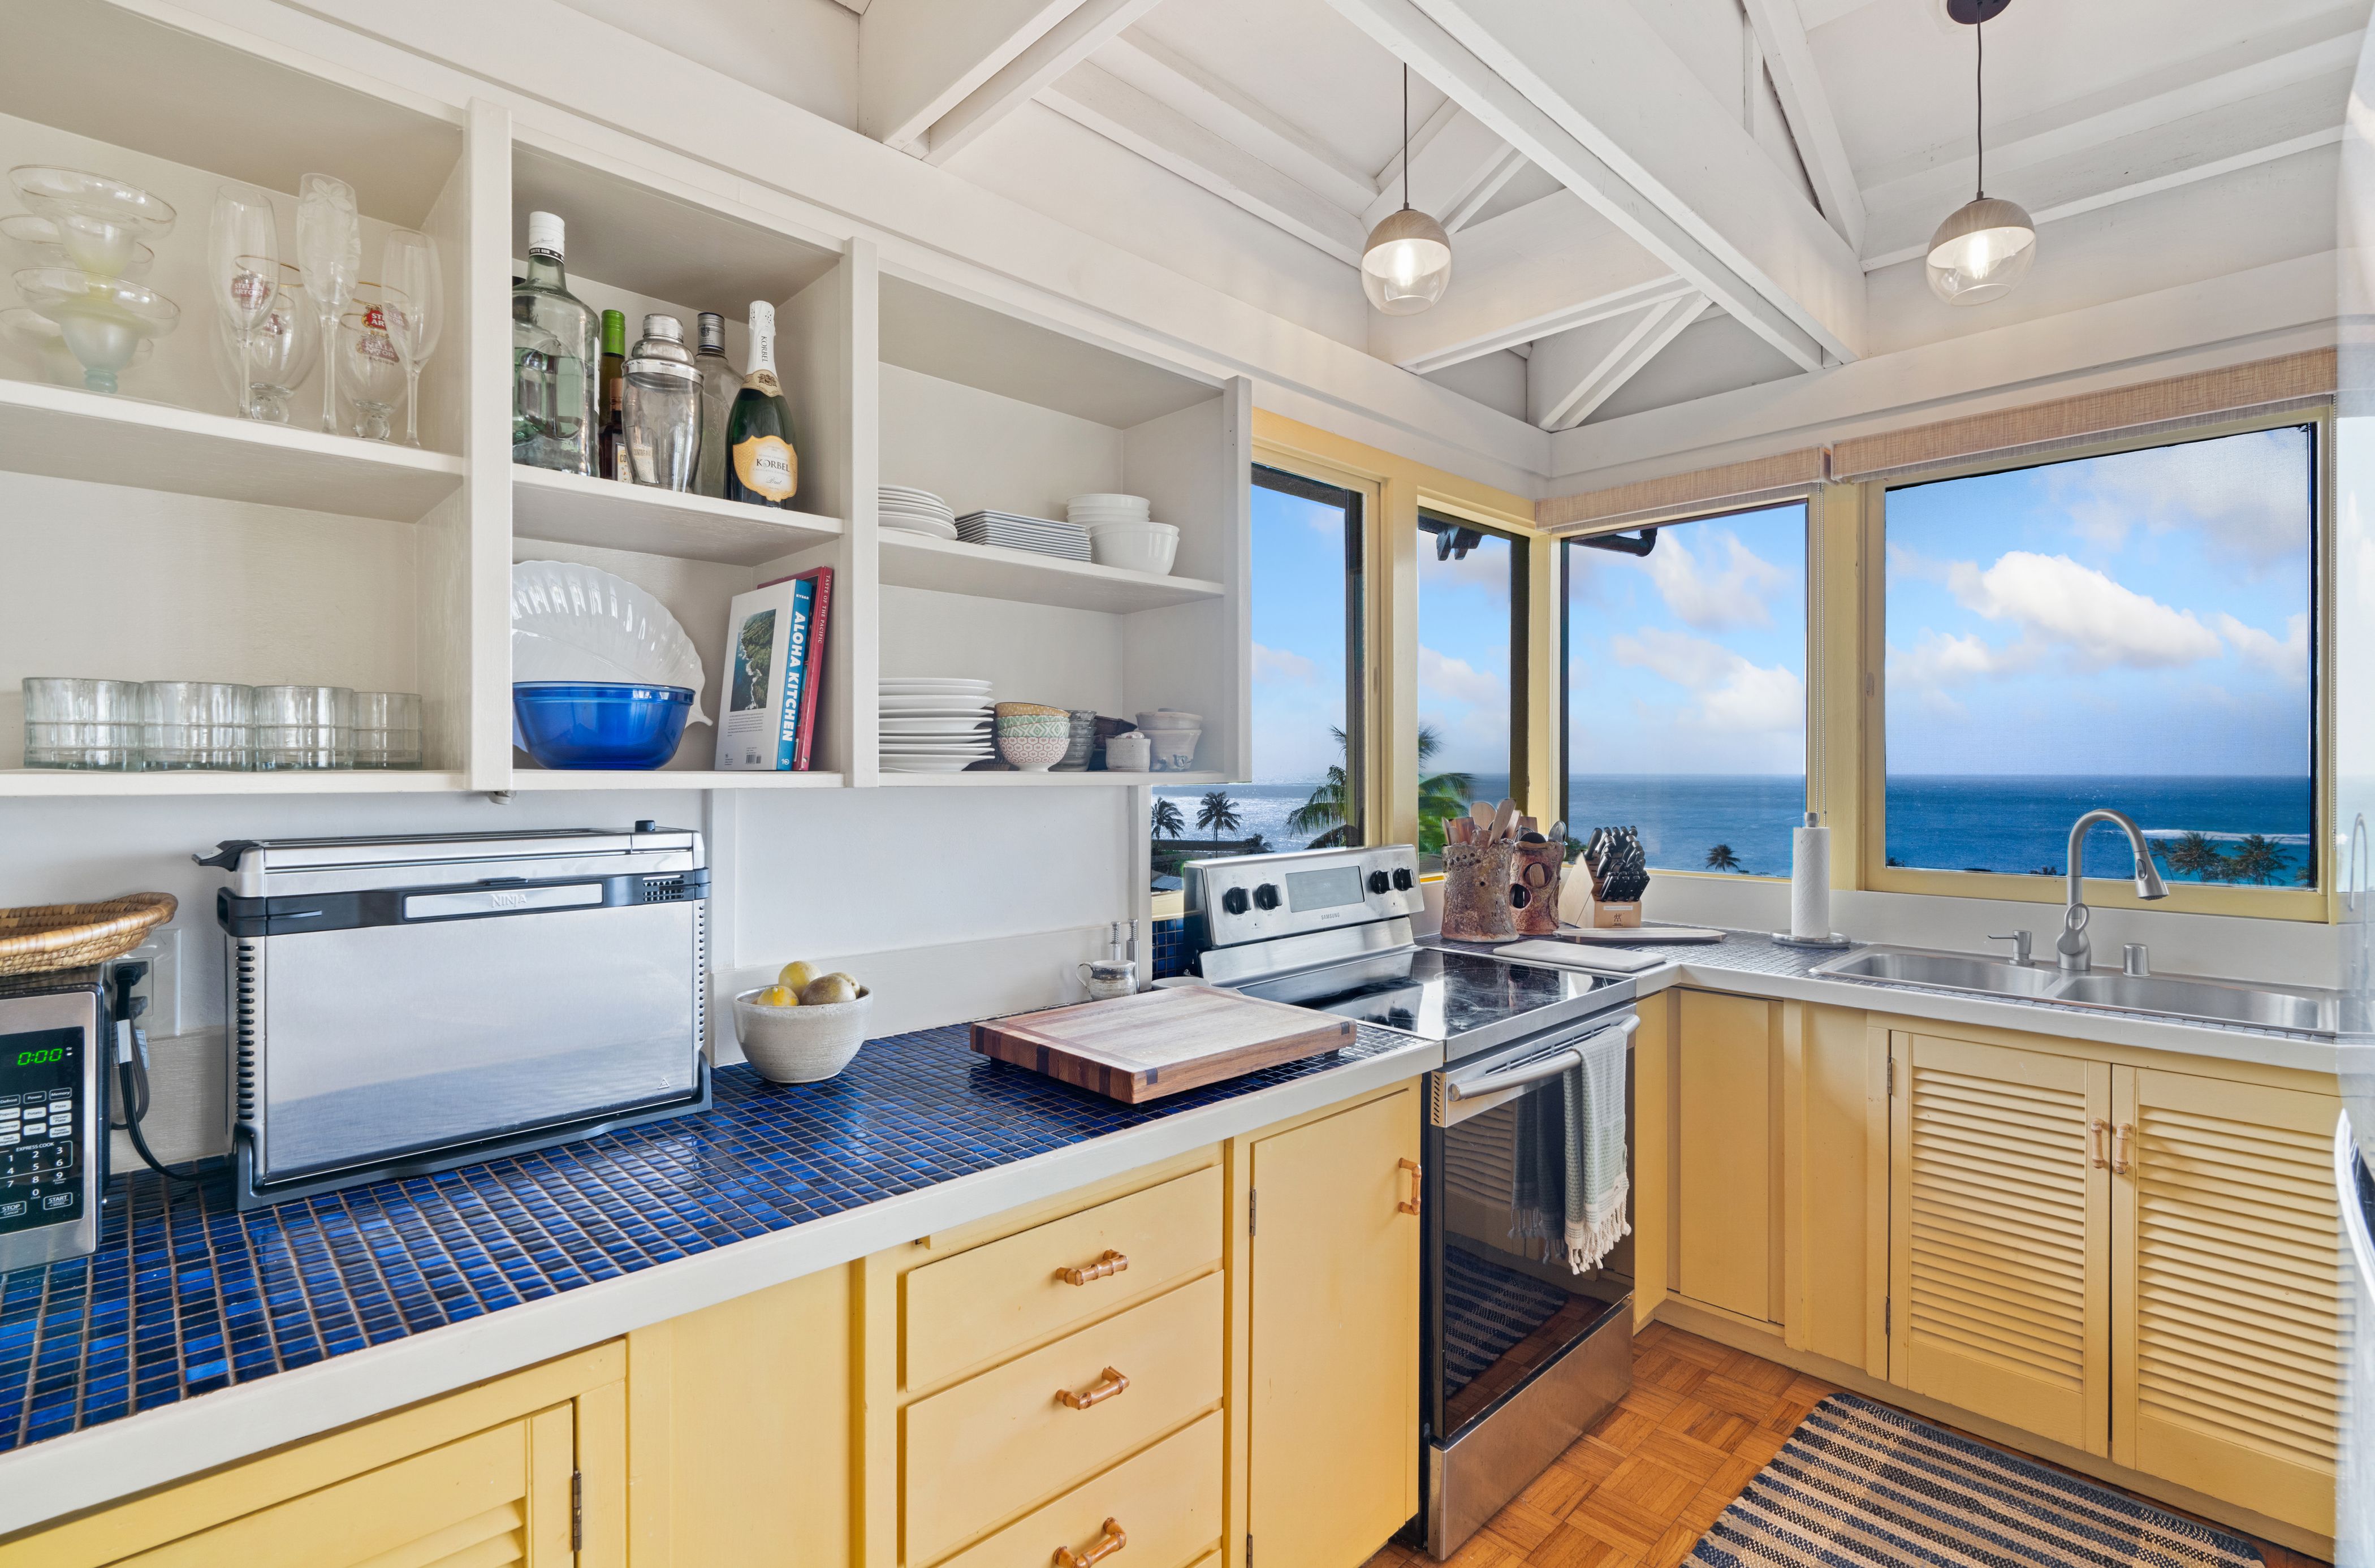 Well stocked kitchen with sunrise and sunset views is great for your friends and family